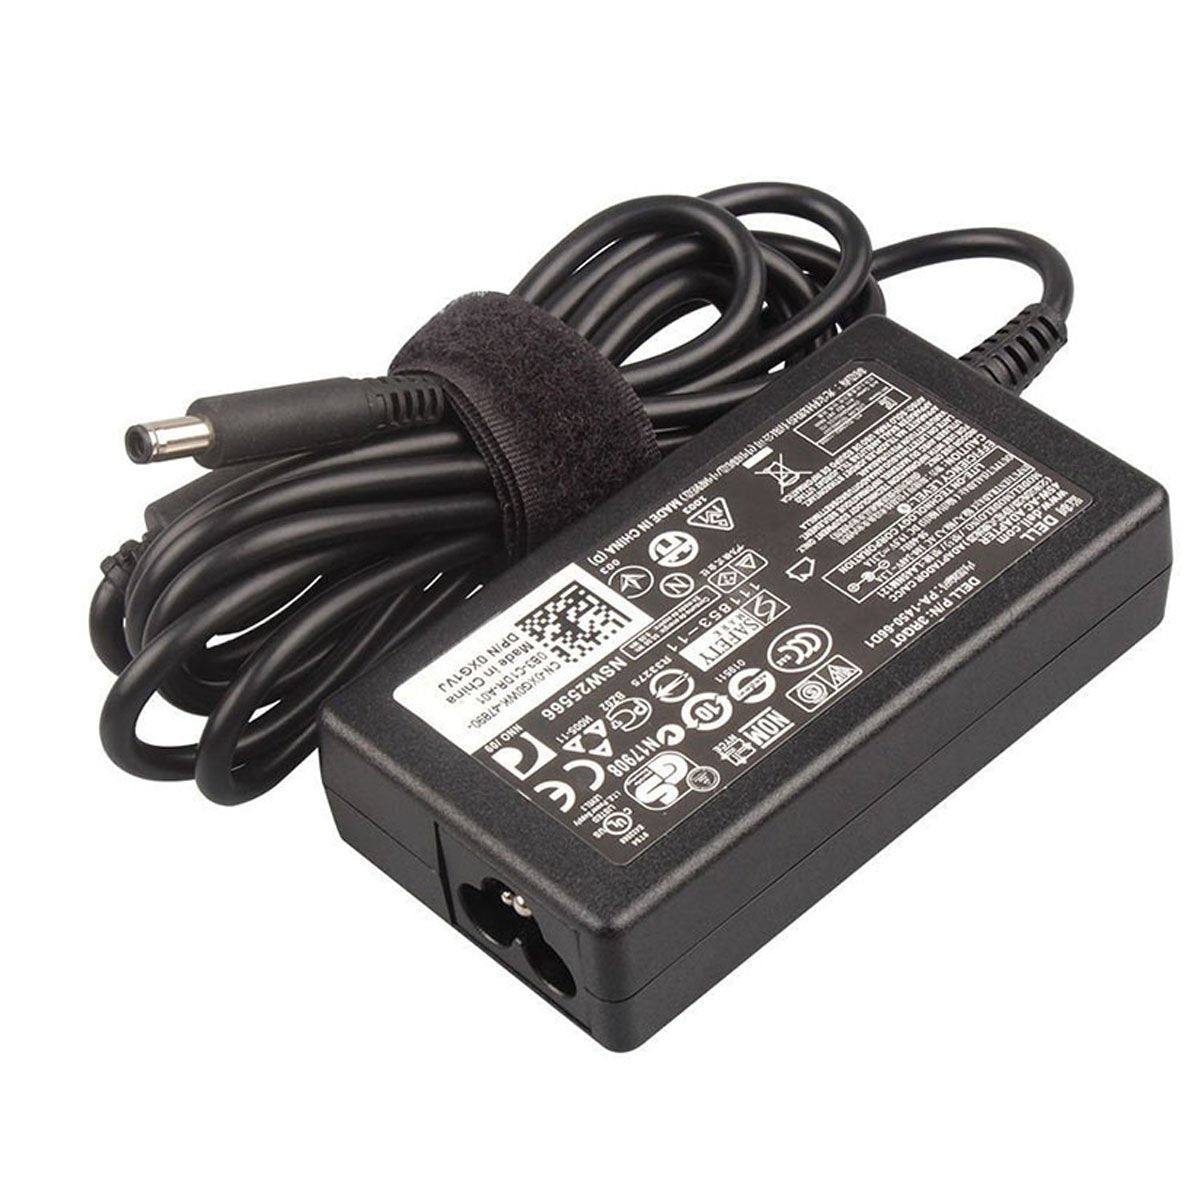 Dell Vostro 14 5459 Original 45W Laptop Charger Adapter With Power Cord 19.5V 4.5mm Pin